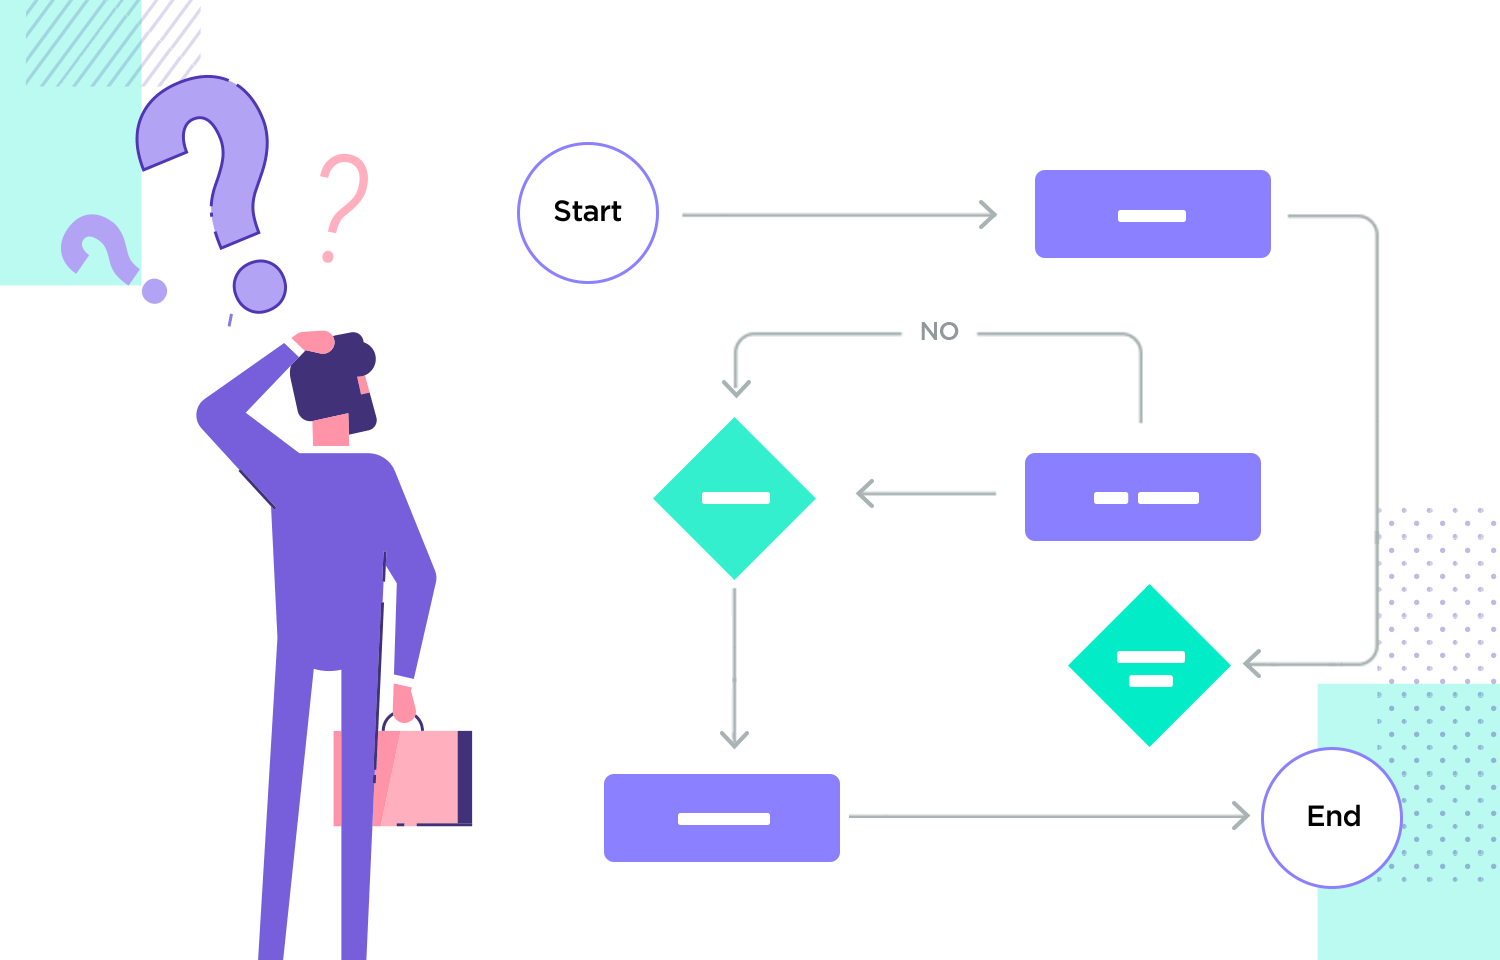 Flowchart illustrating a decision-making process from start to end with a user pondering over the steps.